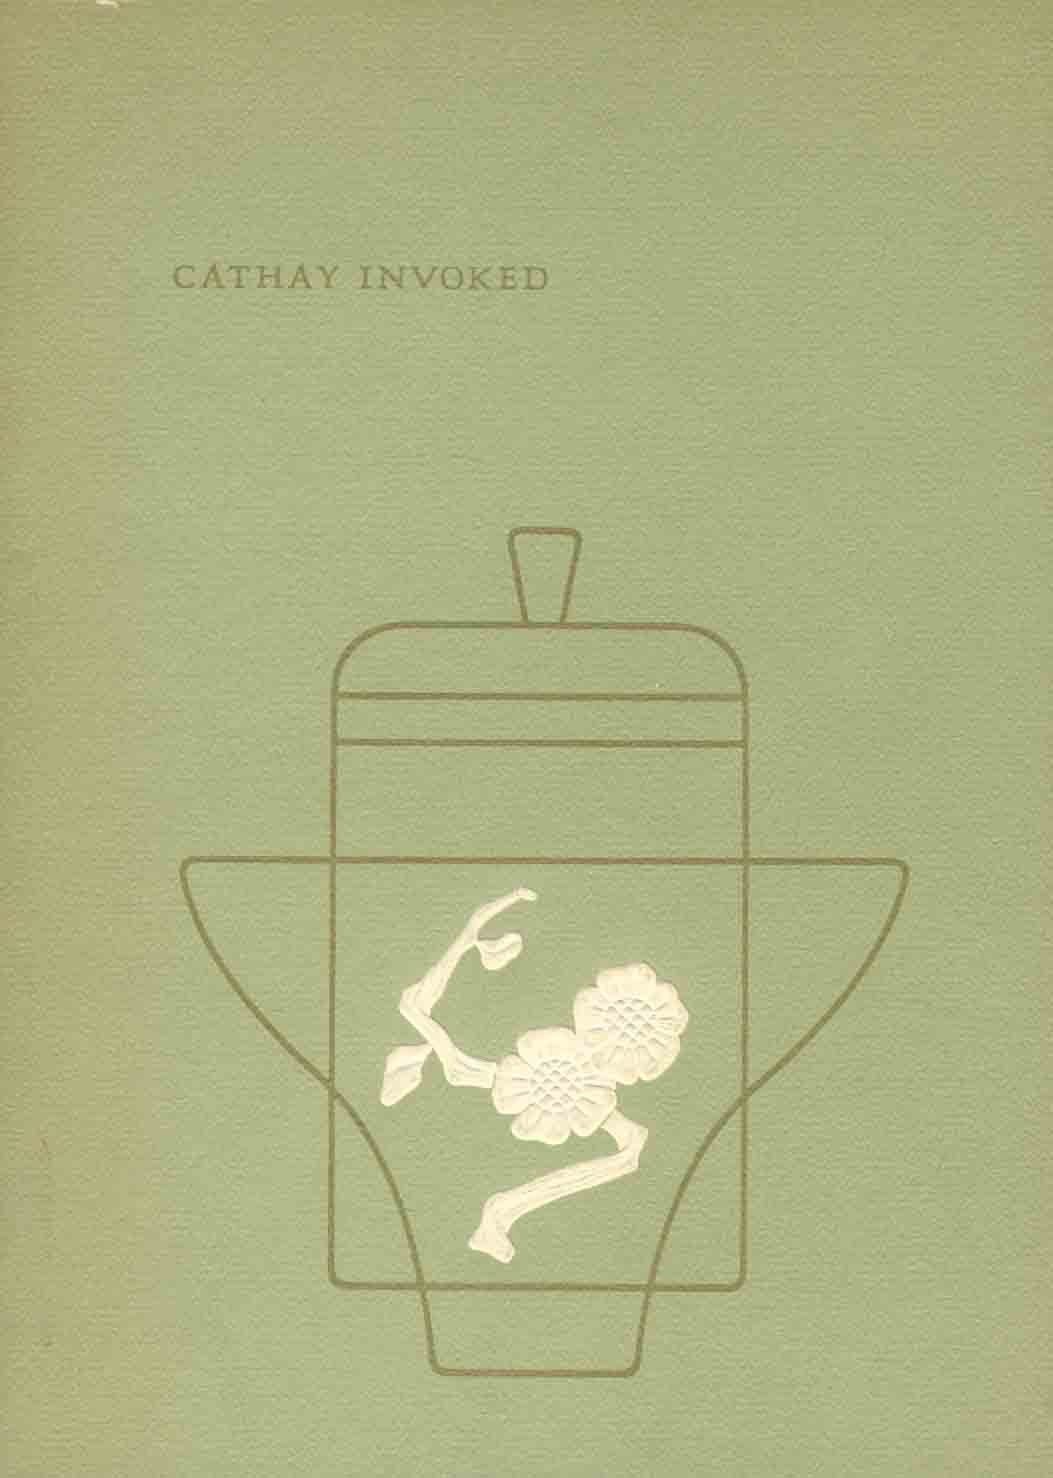  - Cathay Invoked - Chinoiserie - A Celestial Empire in the West